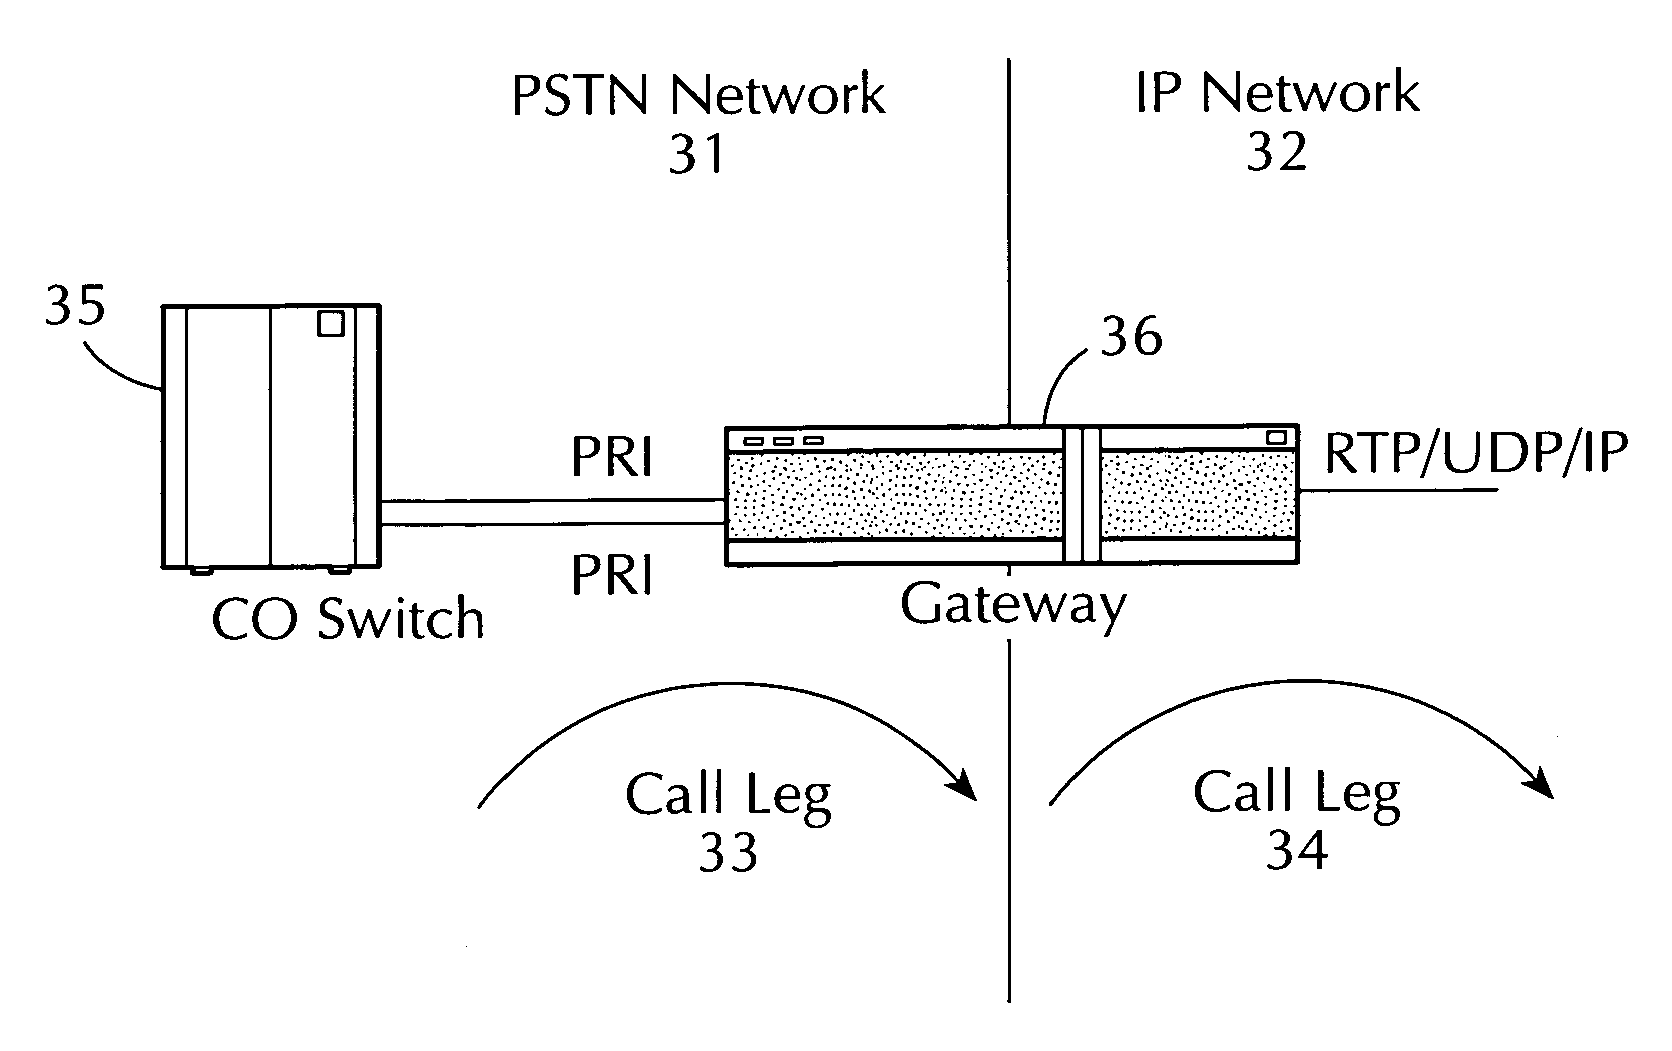 Method and apparatus for estimating the call grade of service and offered traffic for voice over internet protocol calls at a PSTN-IP network gateway